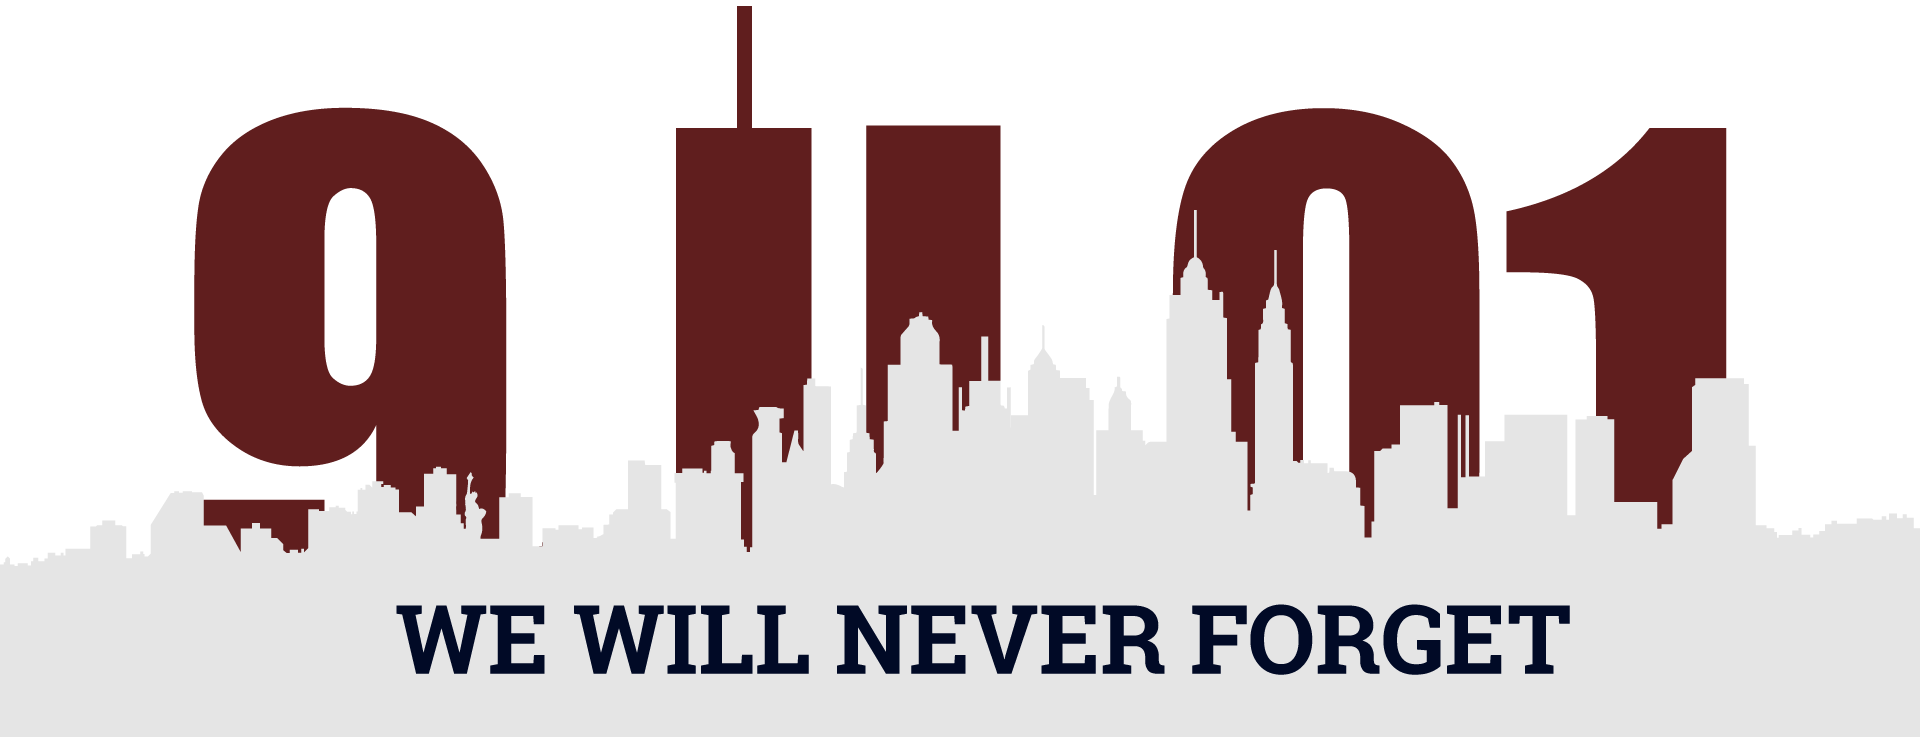 Footer 911 Rememberance - 9 11 Never Forget Transparent (1920x737), Png Dow...